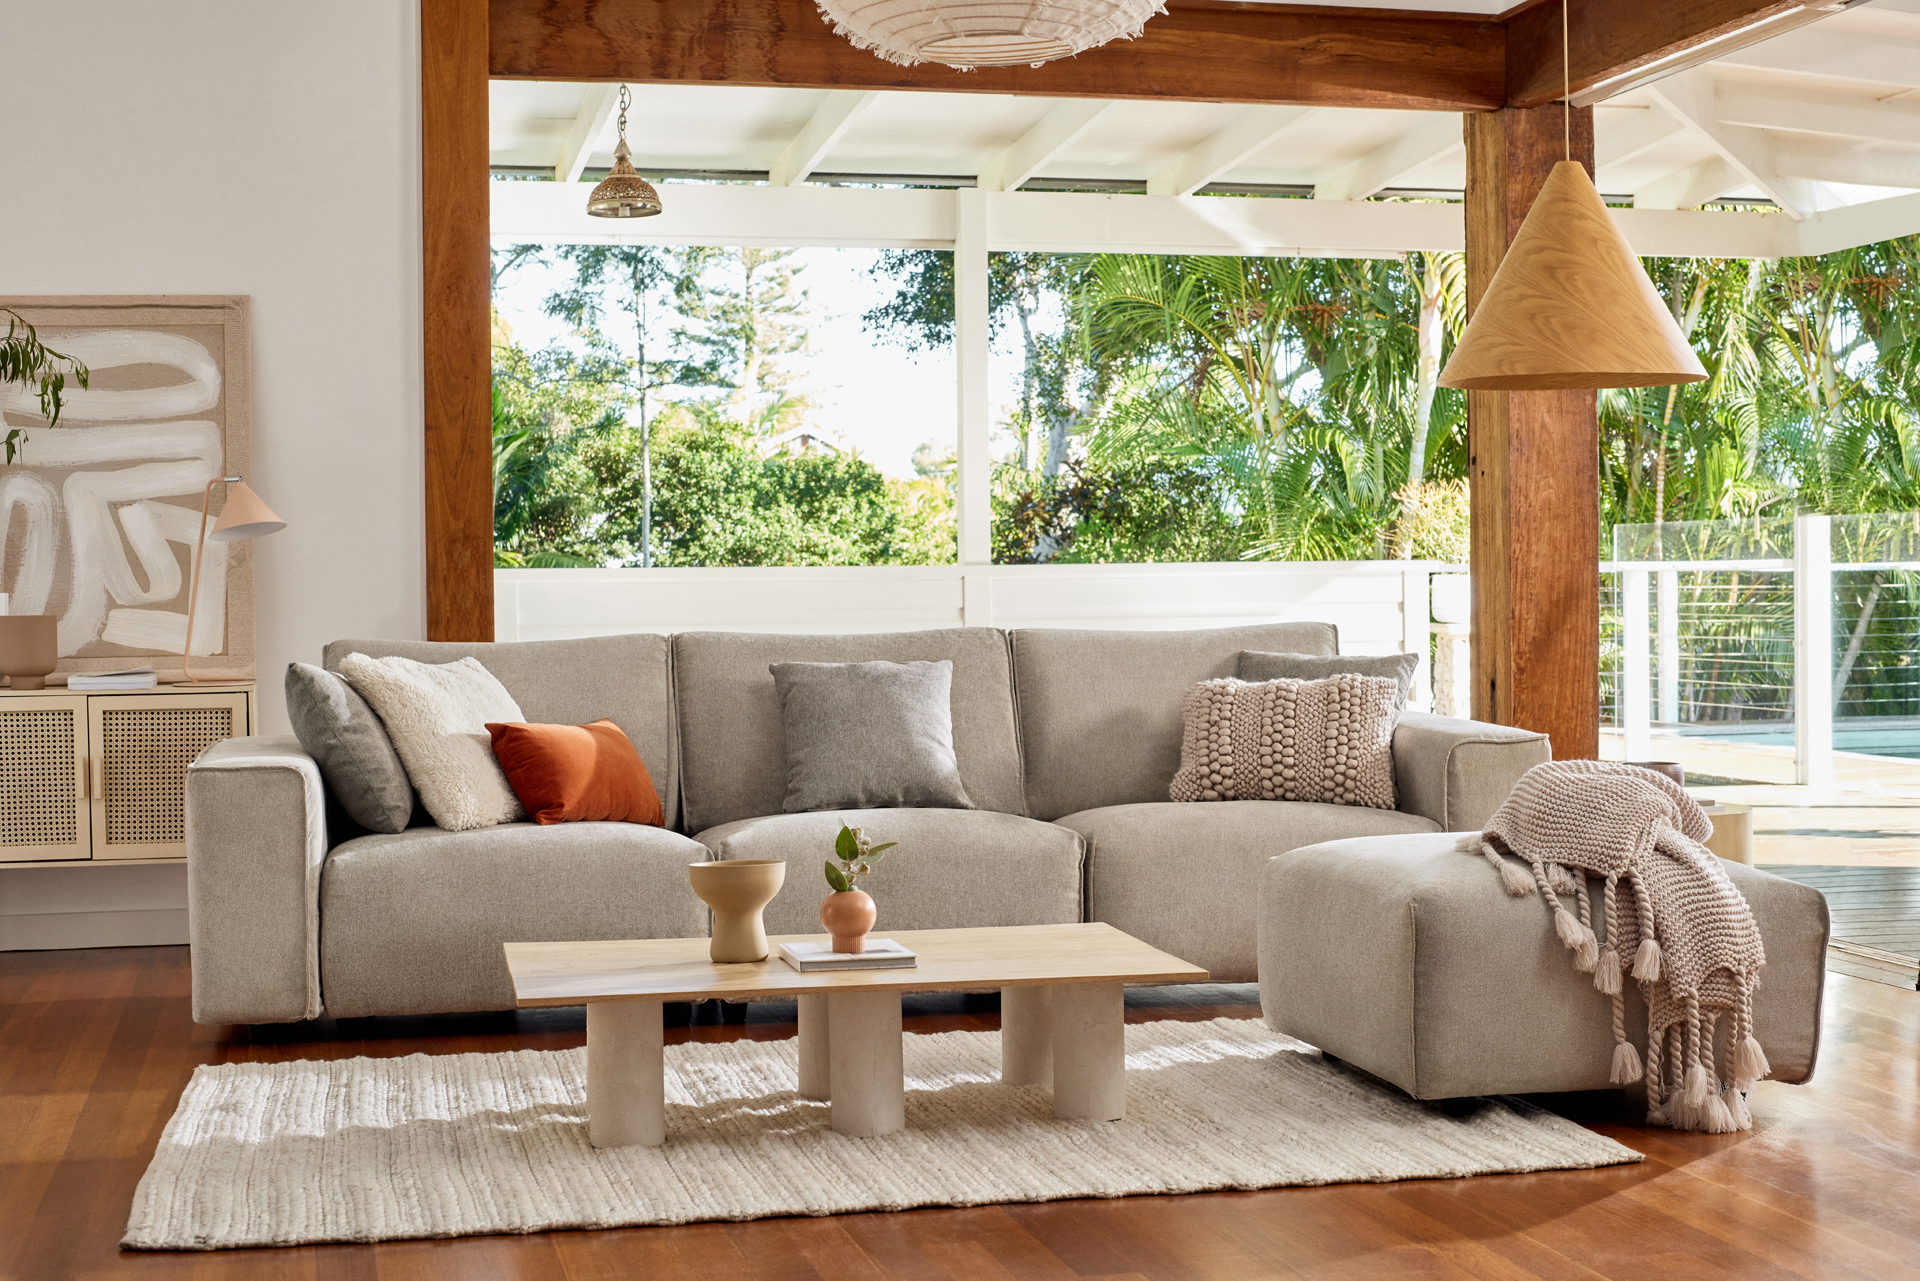 A beautiful Koala sofa in an airy living room with an outlook to the pool and garden